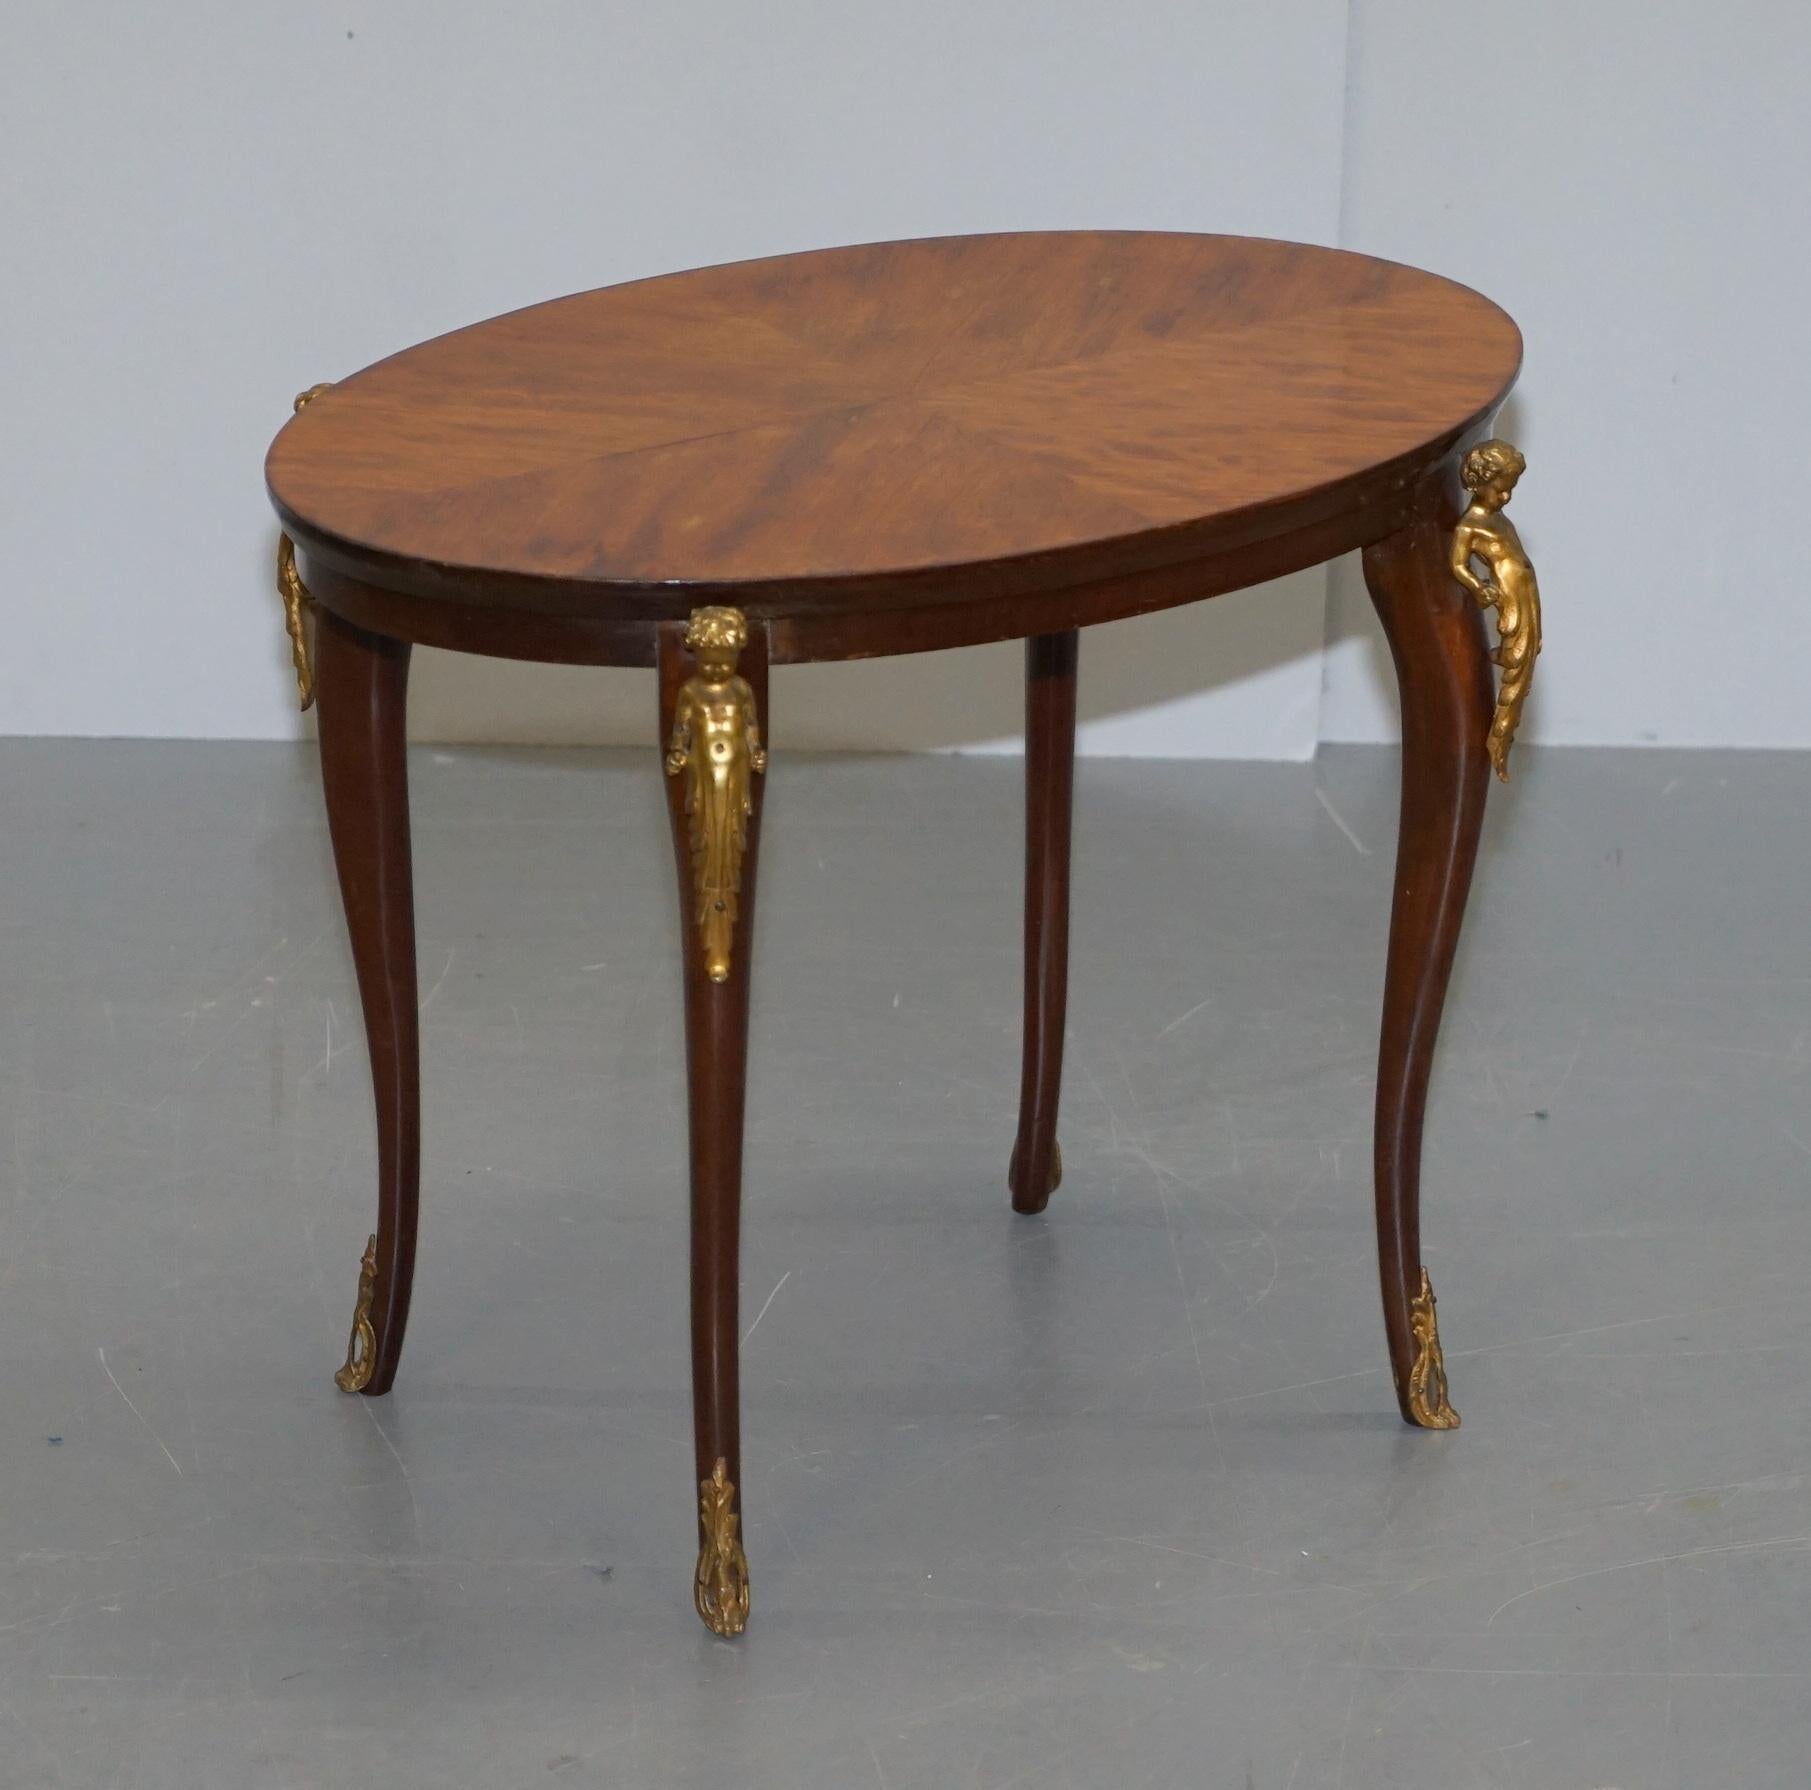 We are delighted to offer for sale this lovely circa 1880 Gilt bronze mounted tulip wood Cherub side occasional coffee table

A very good looking and well made piece, the gilt bronze mounts are very Regency however I believe this to be a high